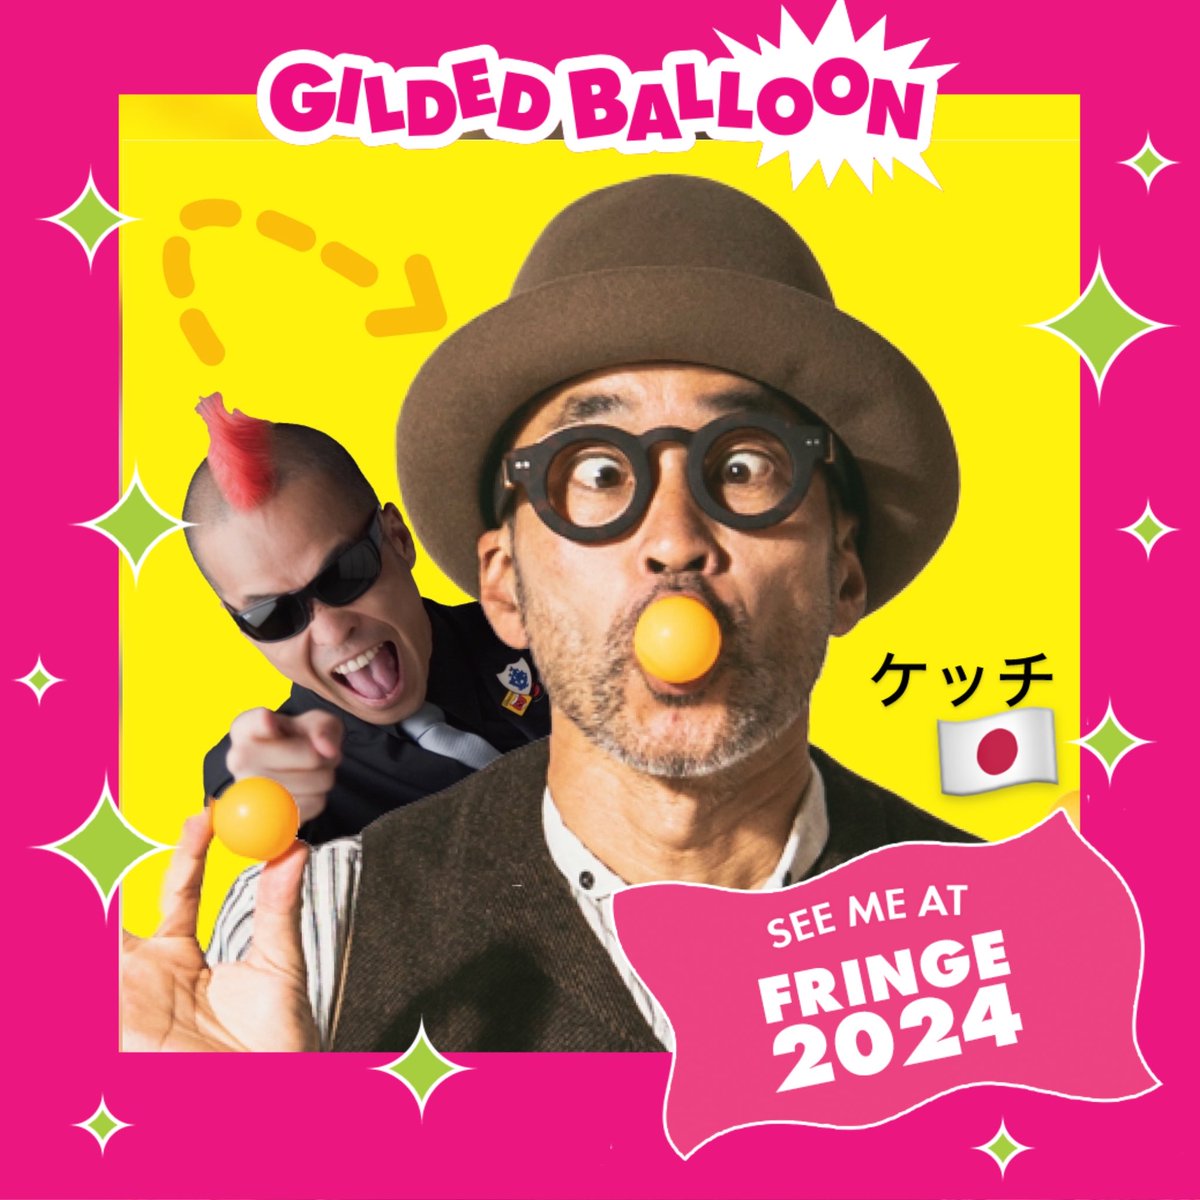 Looking forward to do my solo show at Edinburgh Fringe 2024! I’ve performed there many years as a member of Gamarjobat and got 5⭐️s. But it’s MY FIRST TIME doing solo.

Family friendly non verbal comedy show from Japan!

Book tickets↓
tickets.edfringe.com/whats-on/ketch…

#QuickFlyer Friday